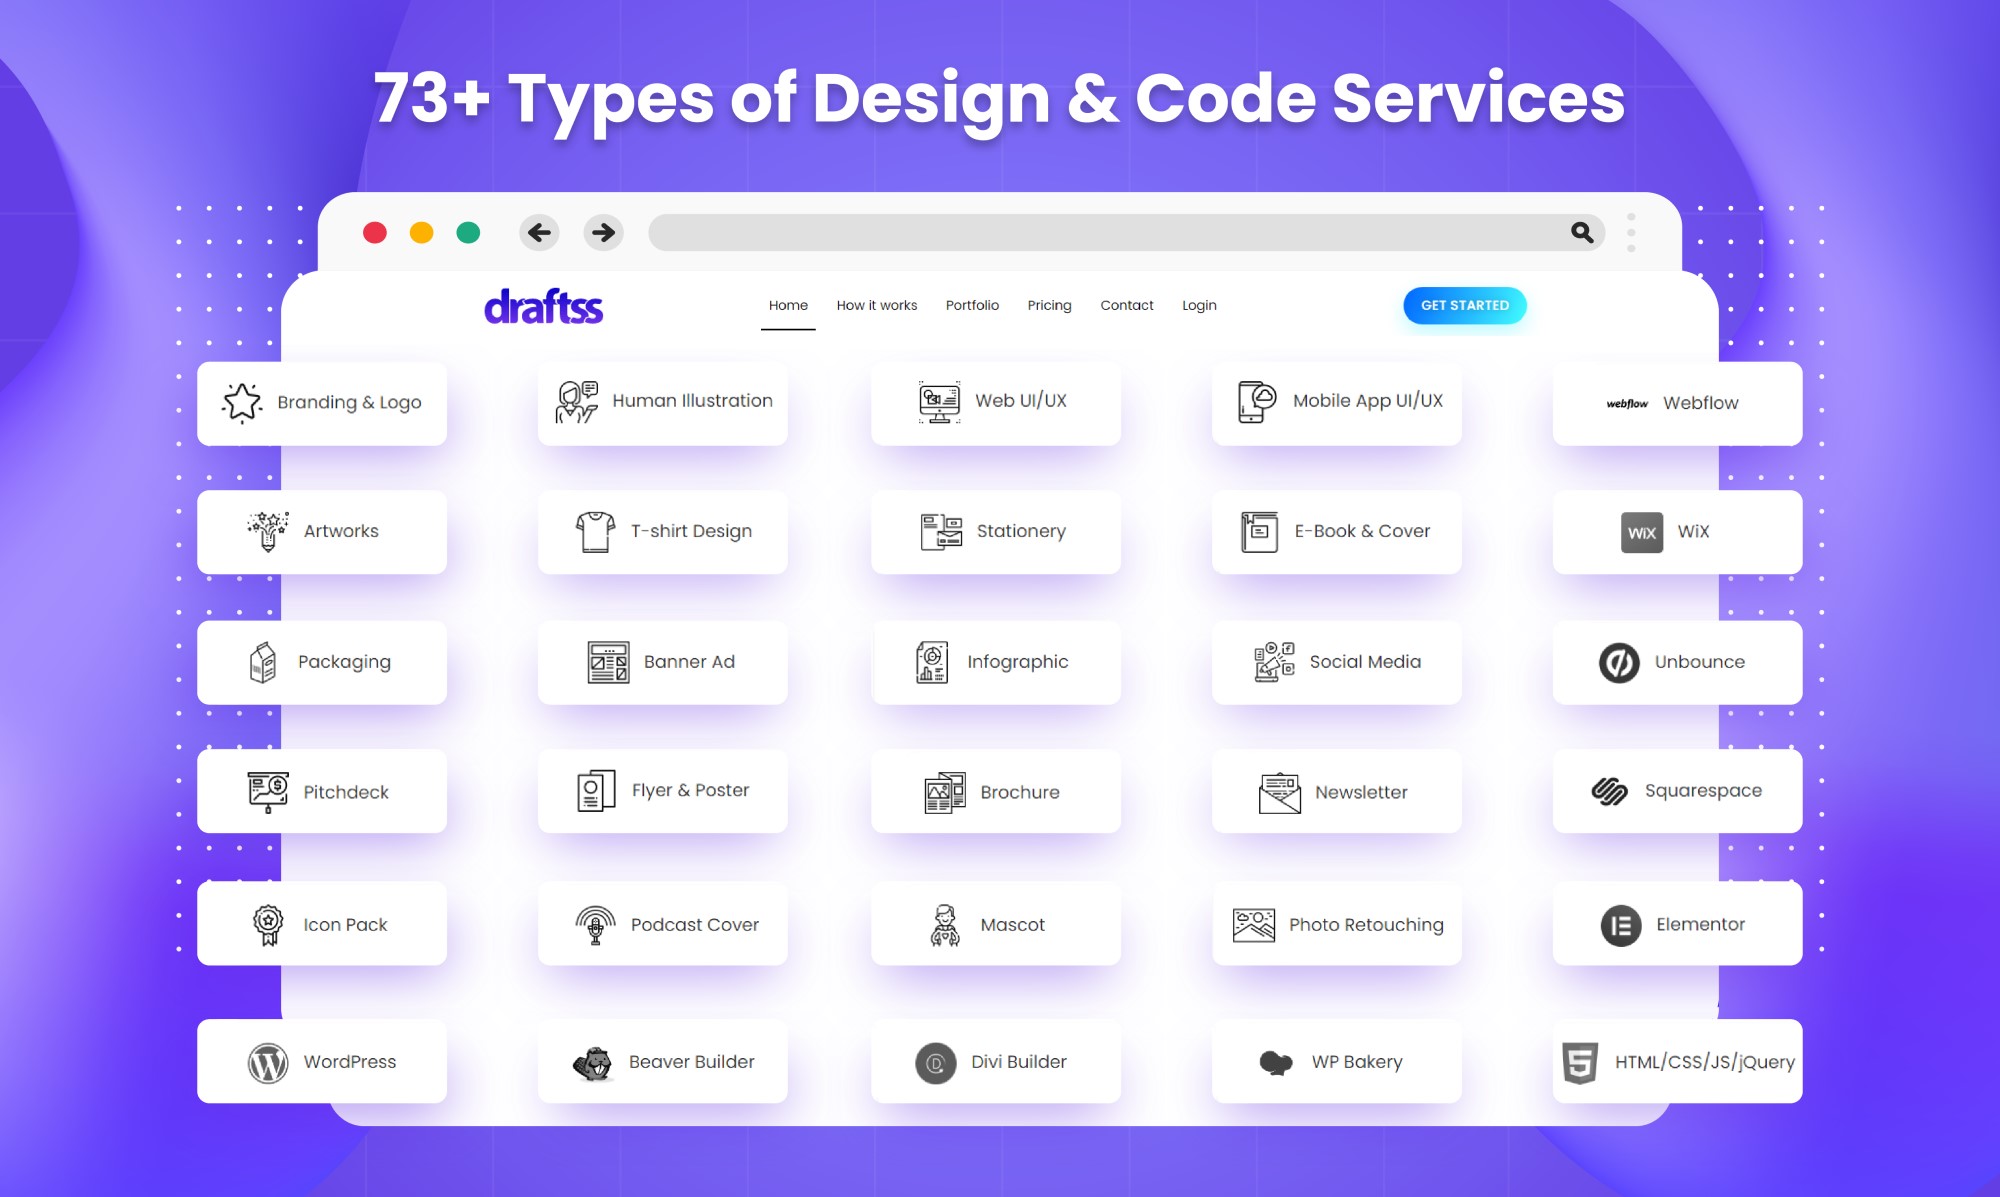 draftss 73+ types of design & code services